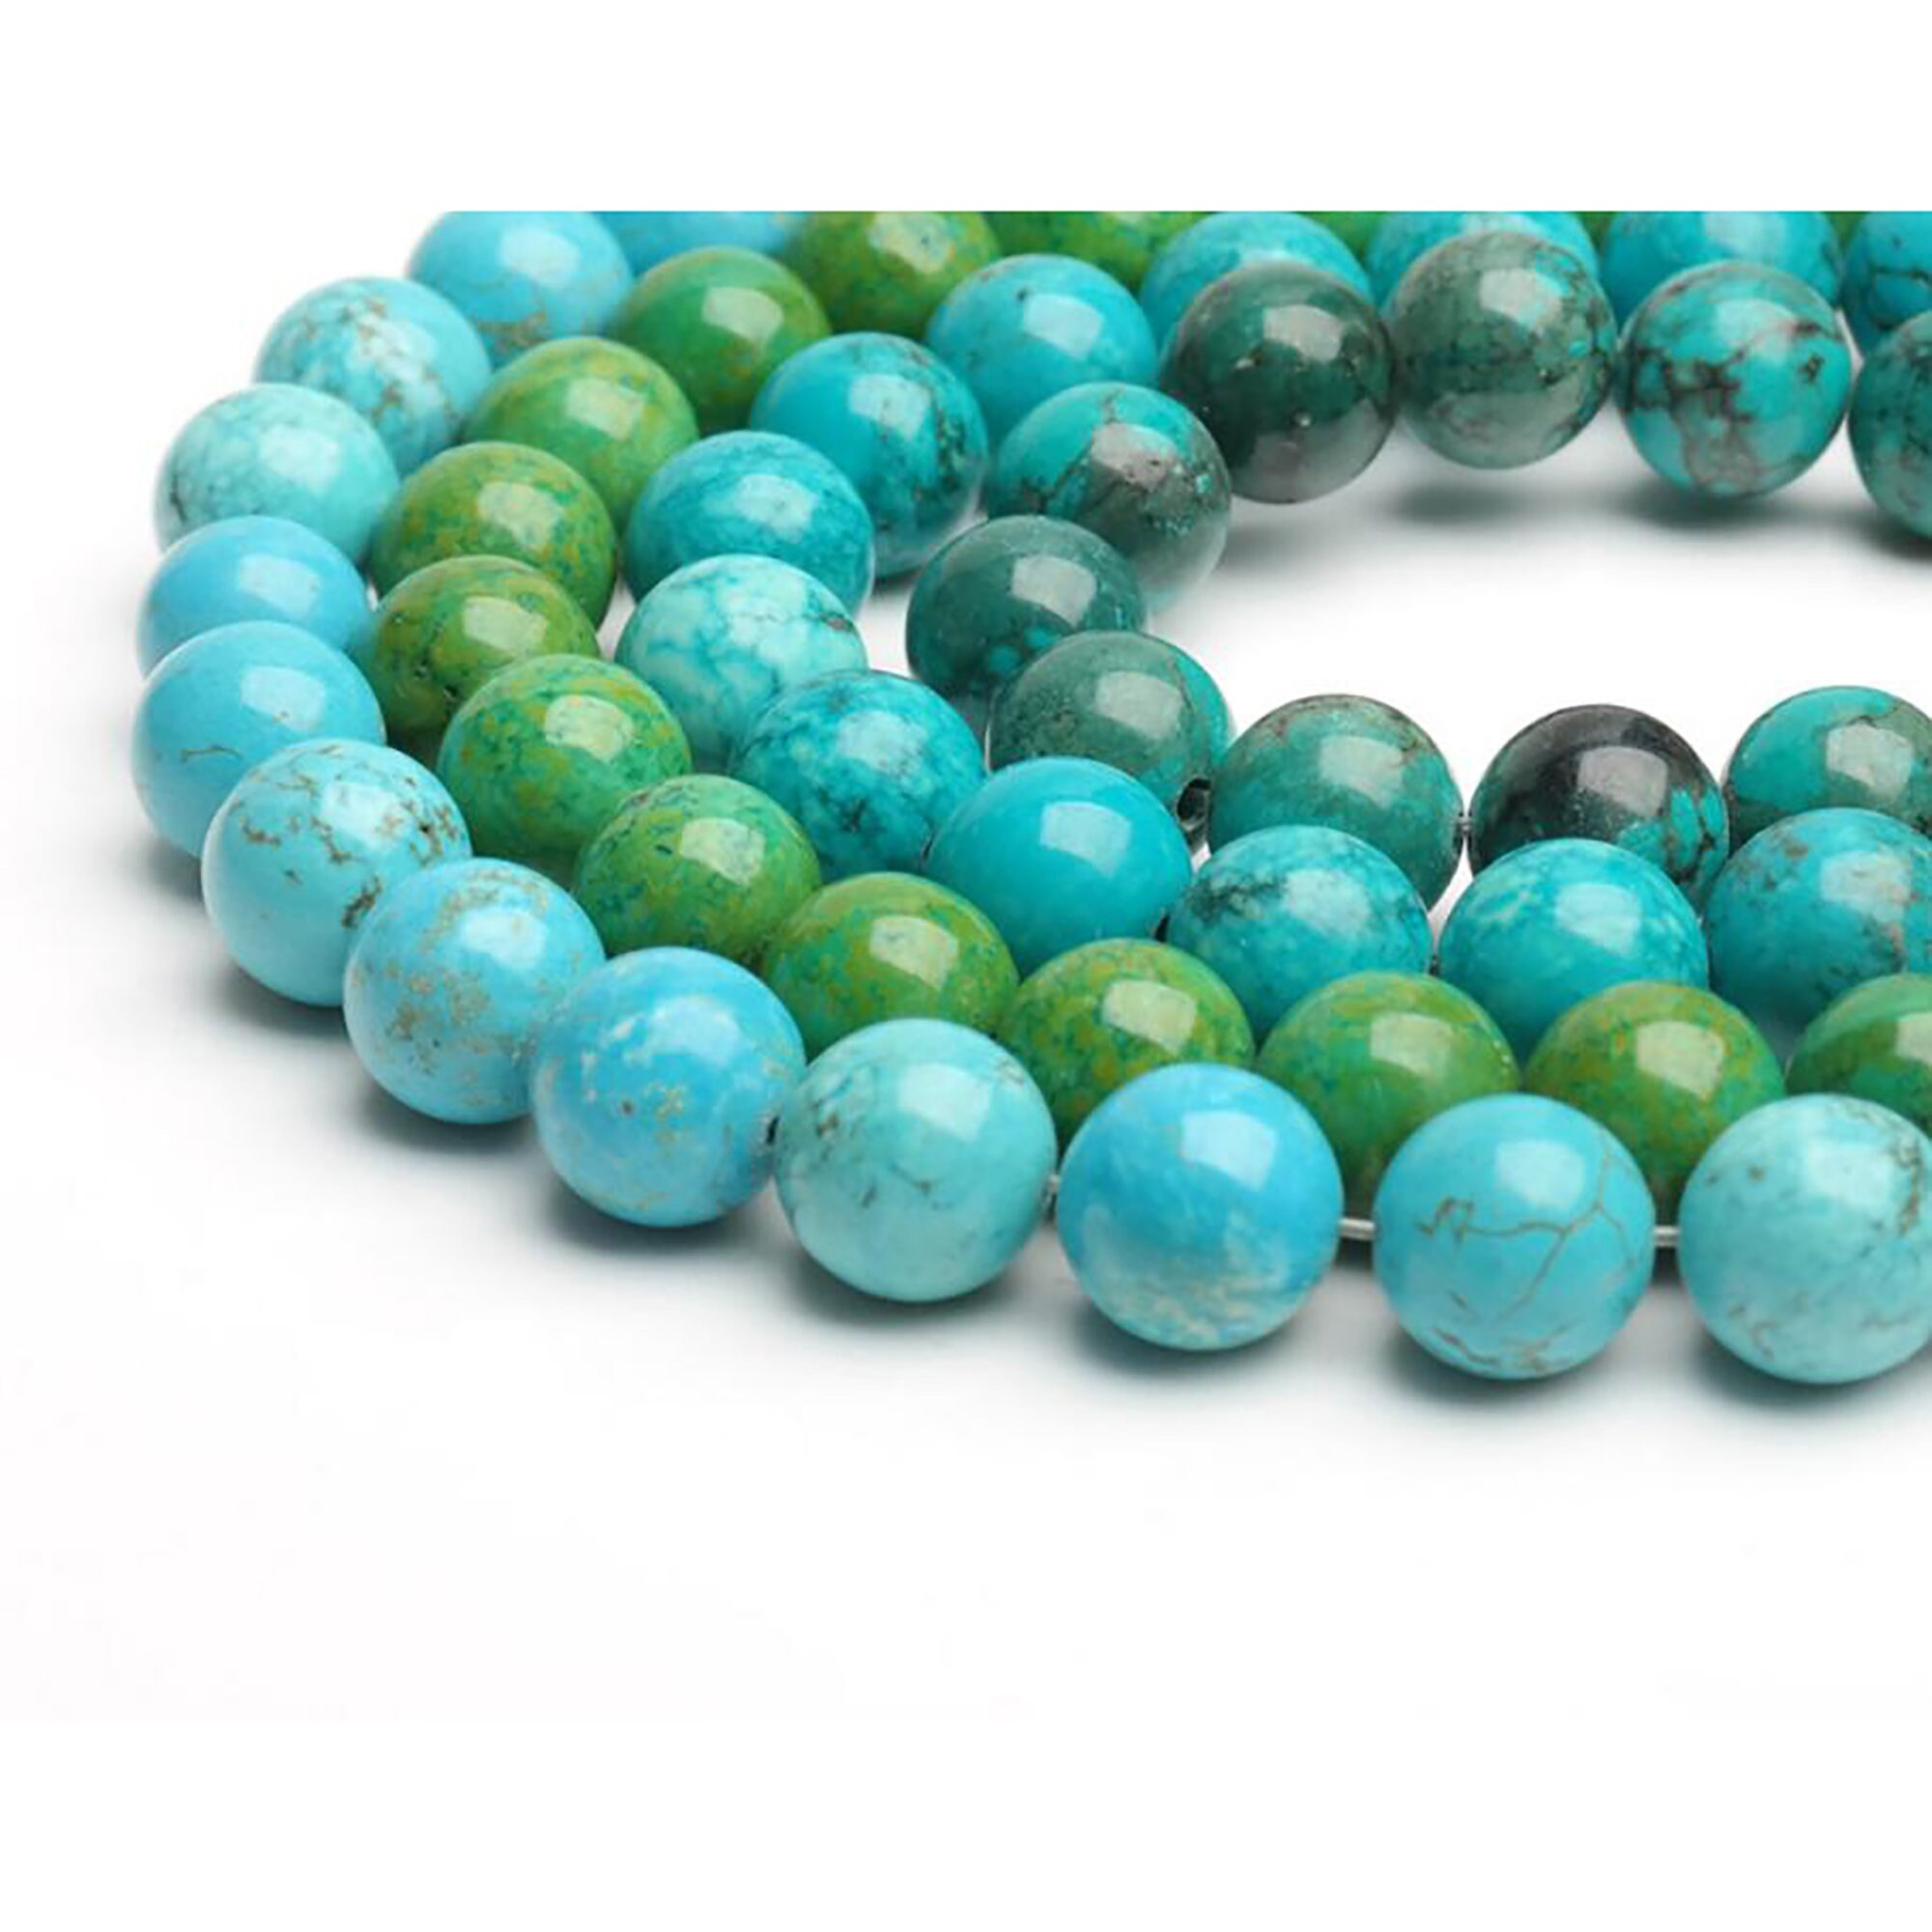 Smooth Natural Stone Blue Turquoises Round Loose Beads 4-16mm For Jewelry Making 